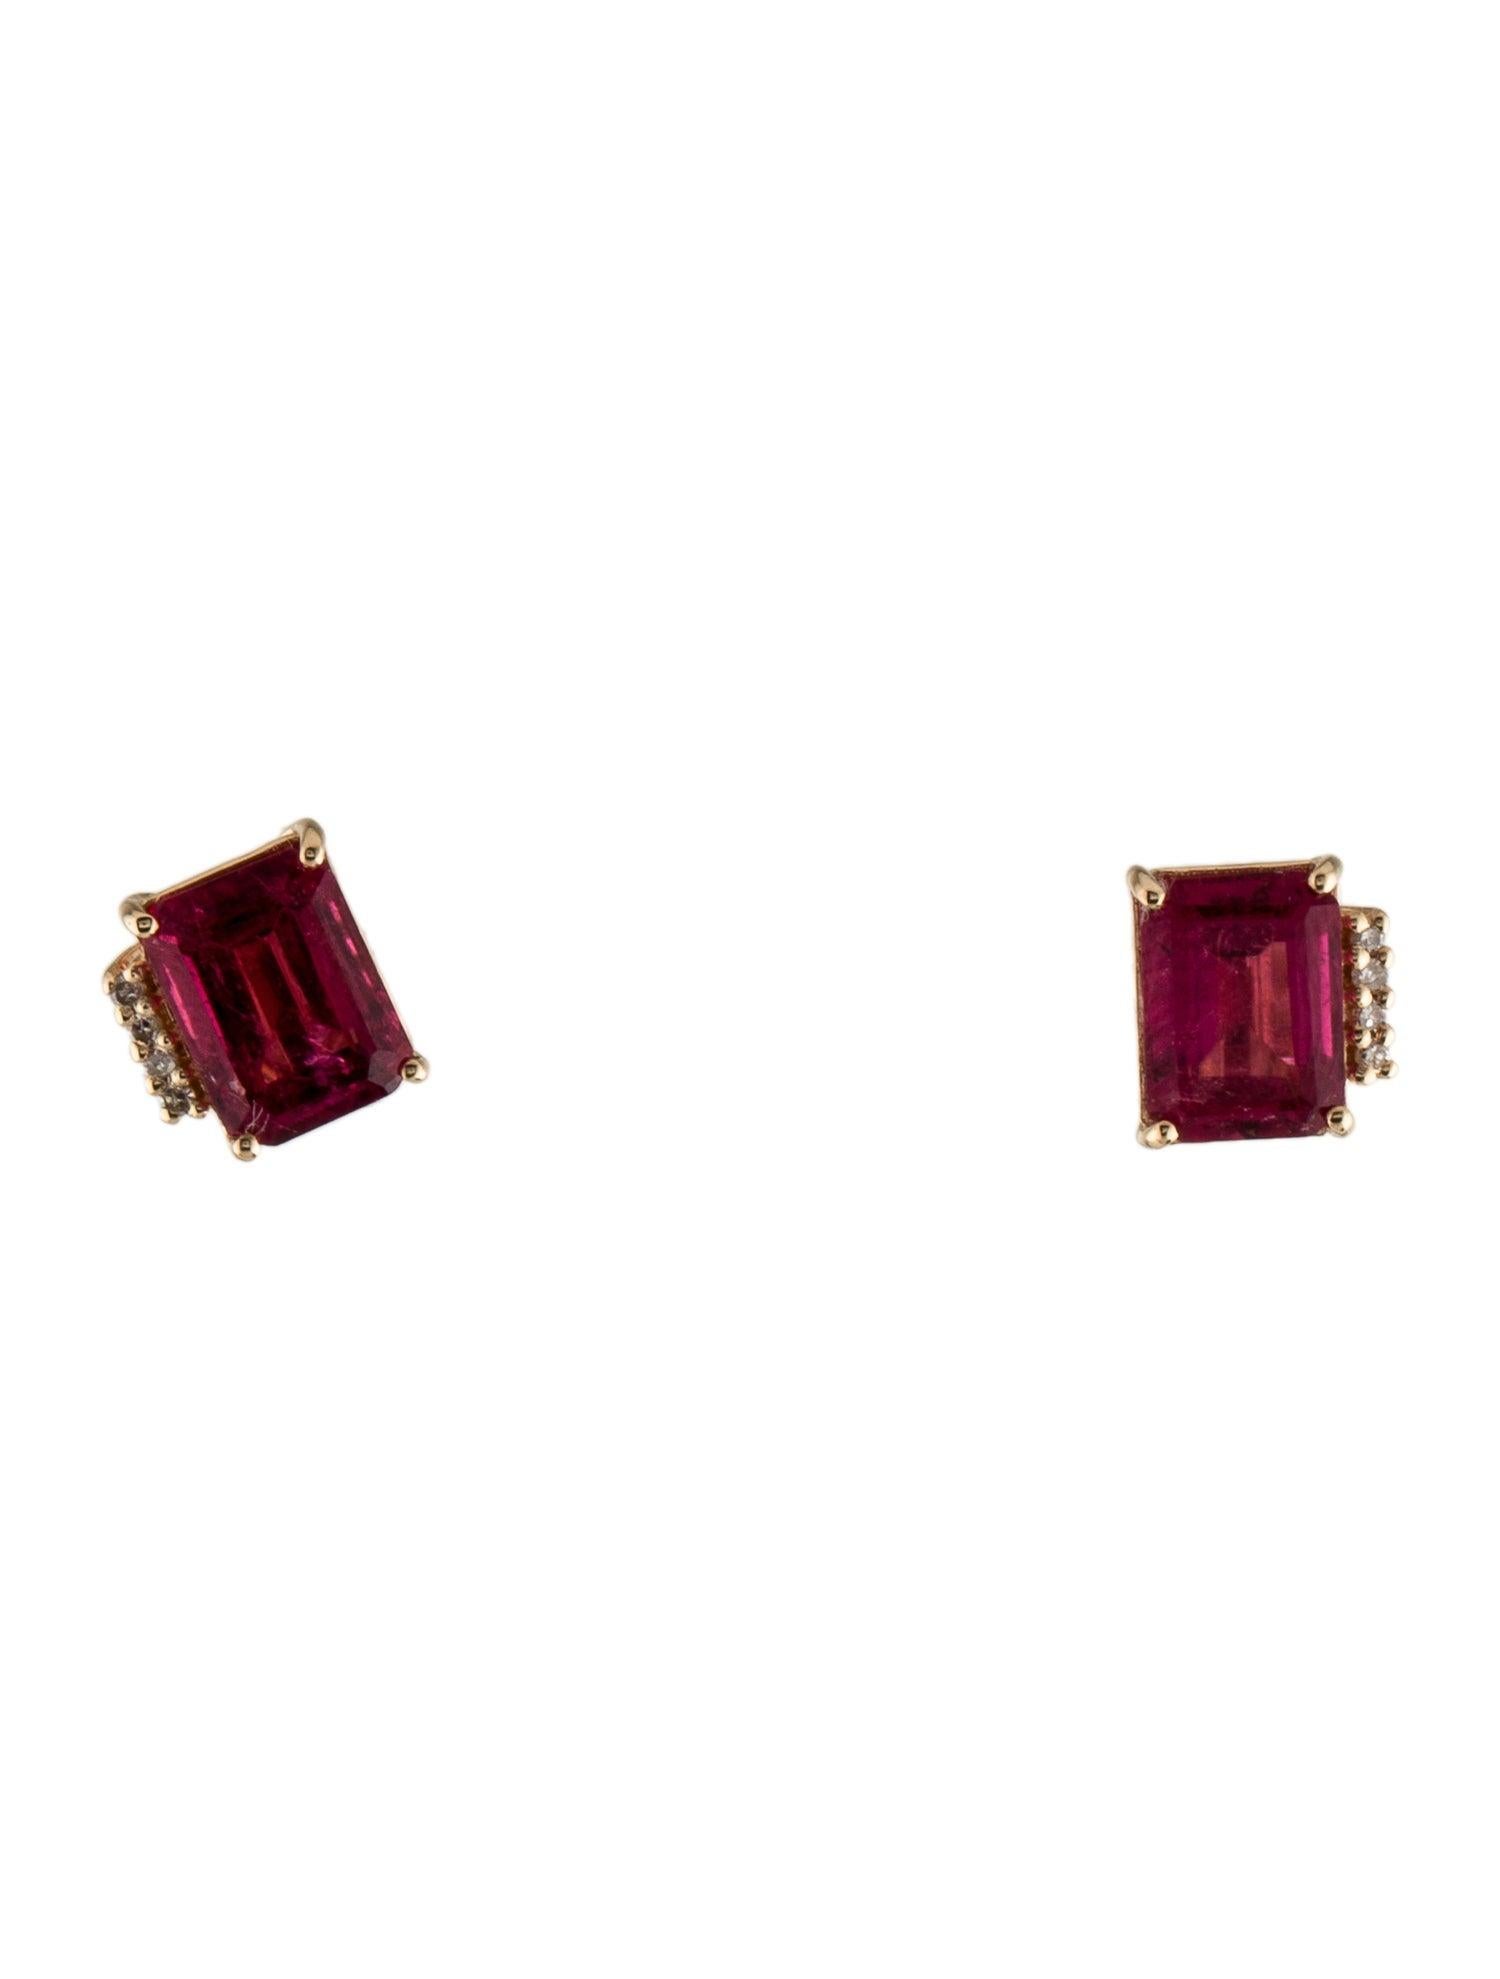 Luxury 14K Tourmaline & Diamond Stud Earrings - Exquisite Gemstone Jewelry In New Condition For Sale In Holtsville, NY